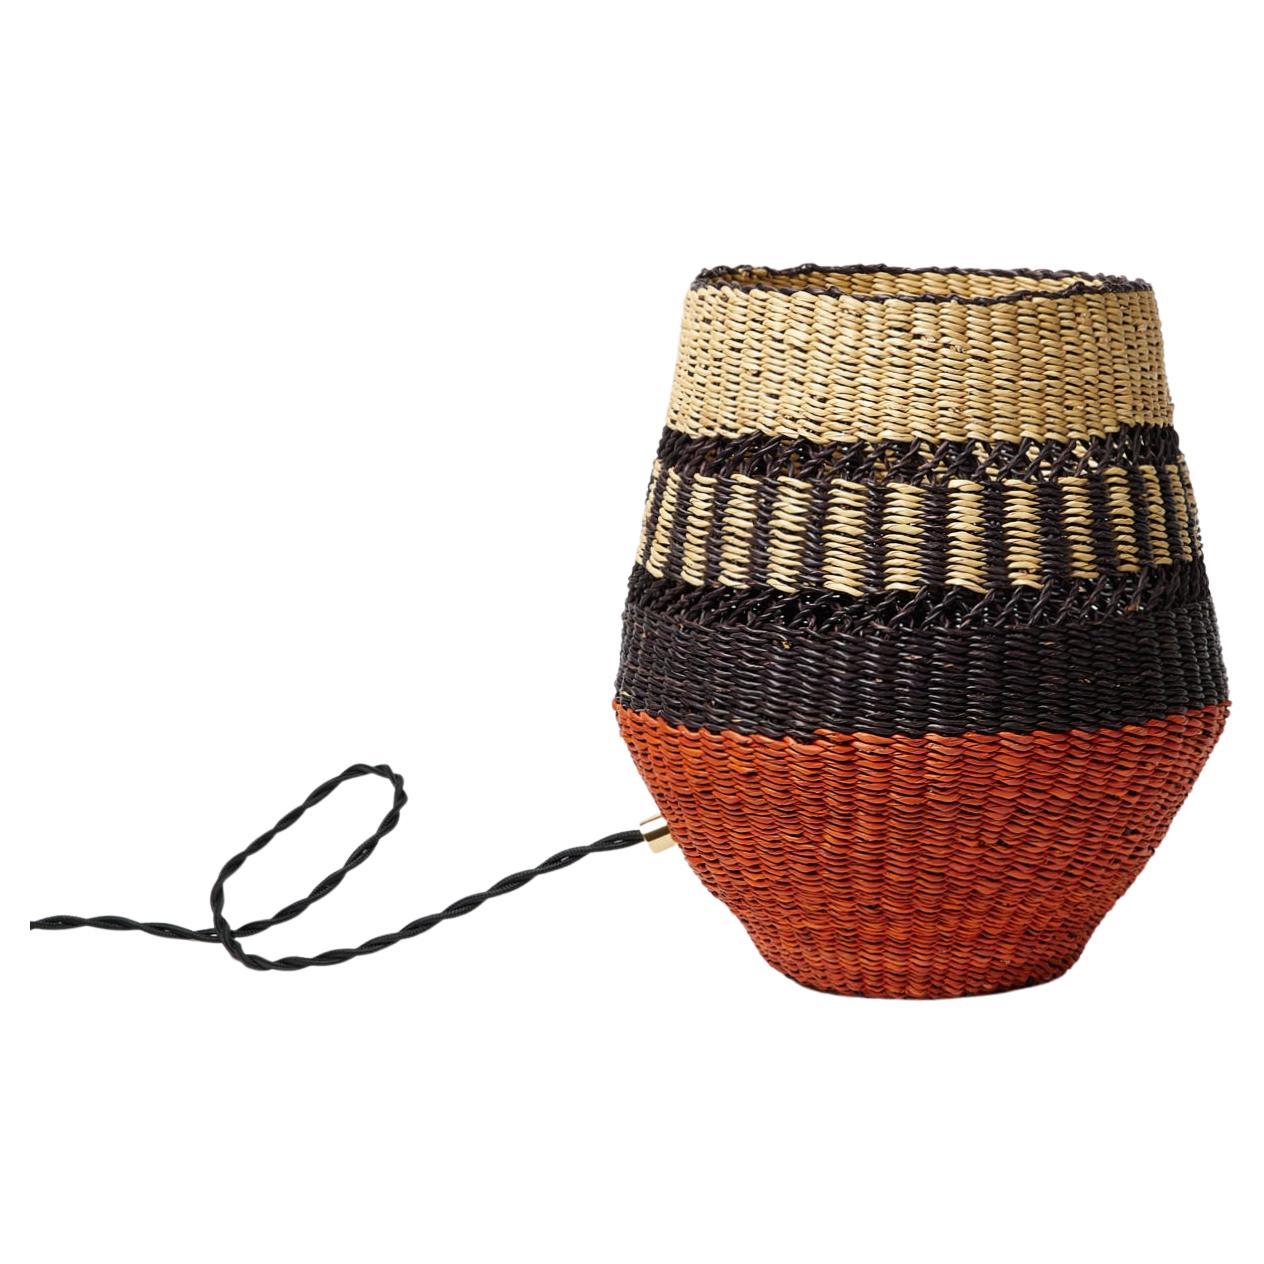 Contemporary Ethnic Handwoven Straw Table Lamp Natural Terracotta and Black